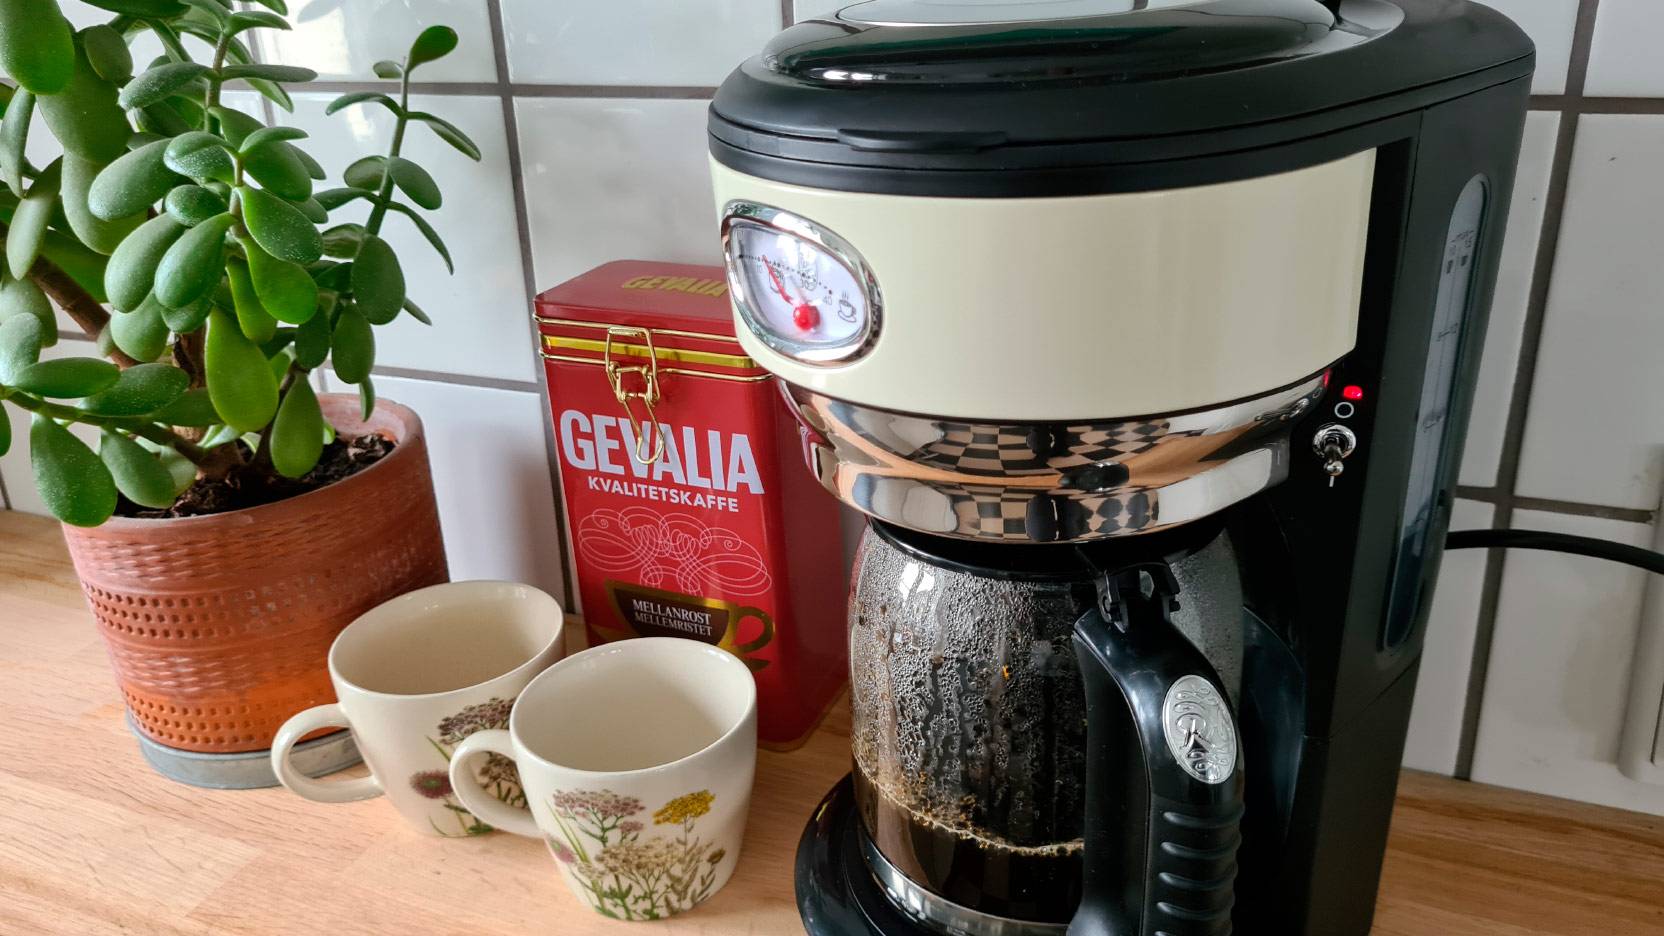 Image of the cream-coloured Russell Hobbs Retro coffee machine brewing a jug of coffee